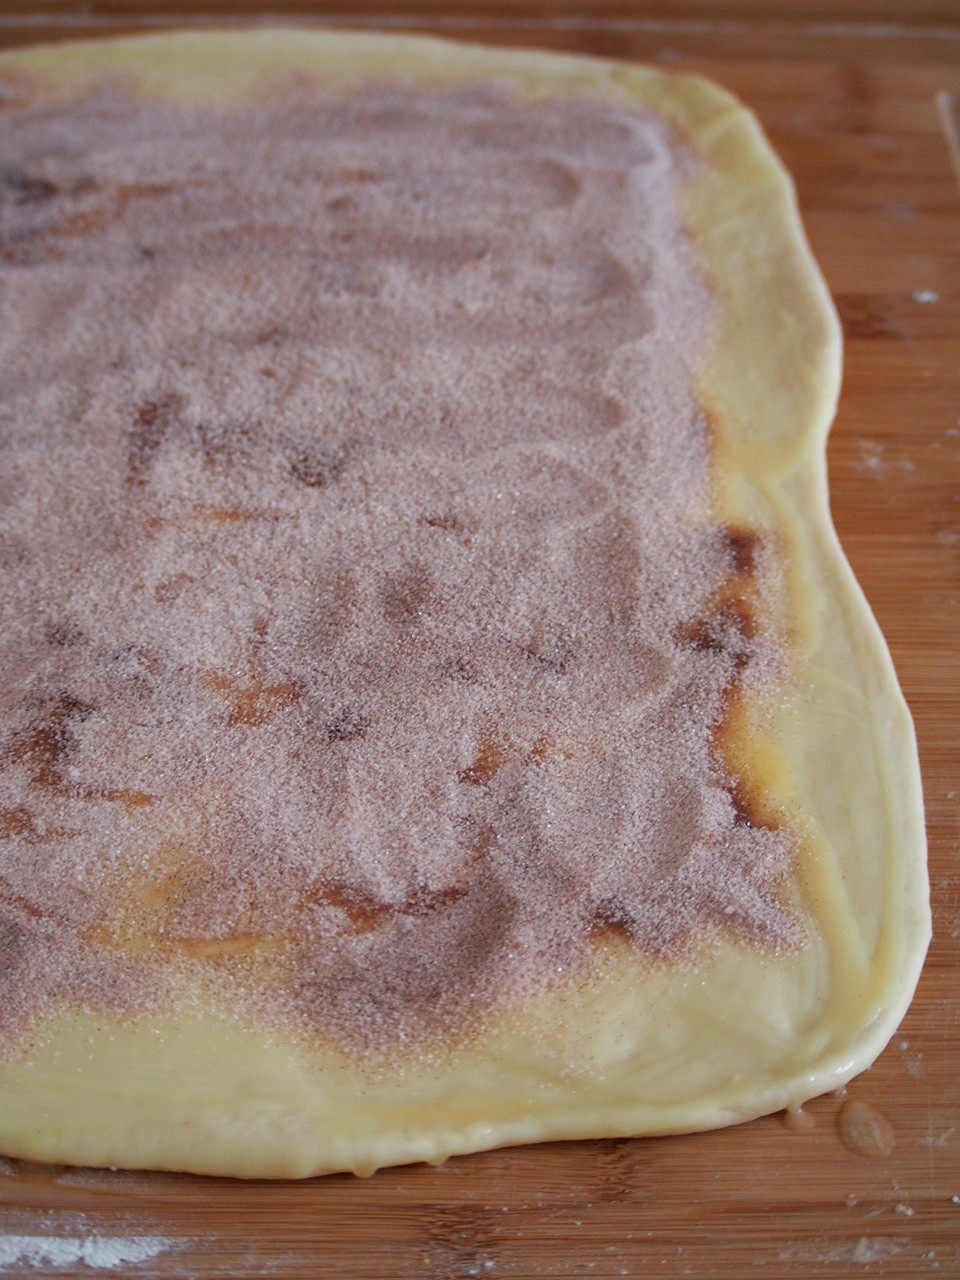 The rectangular dough with filling spread all over.